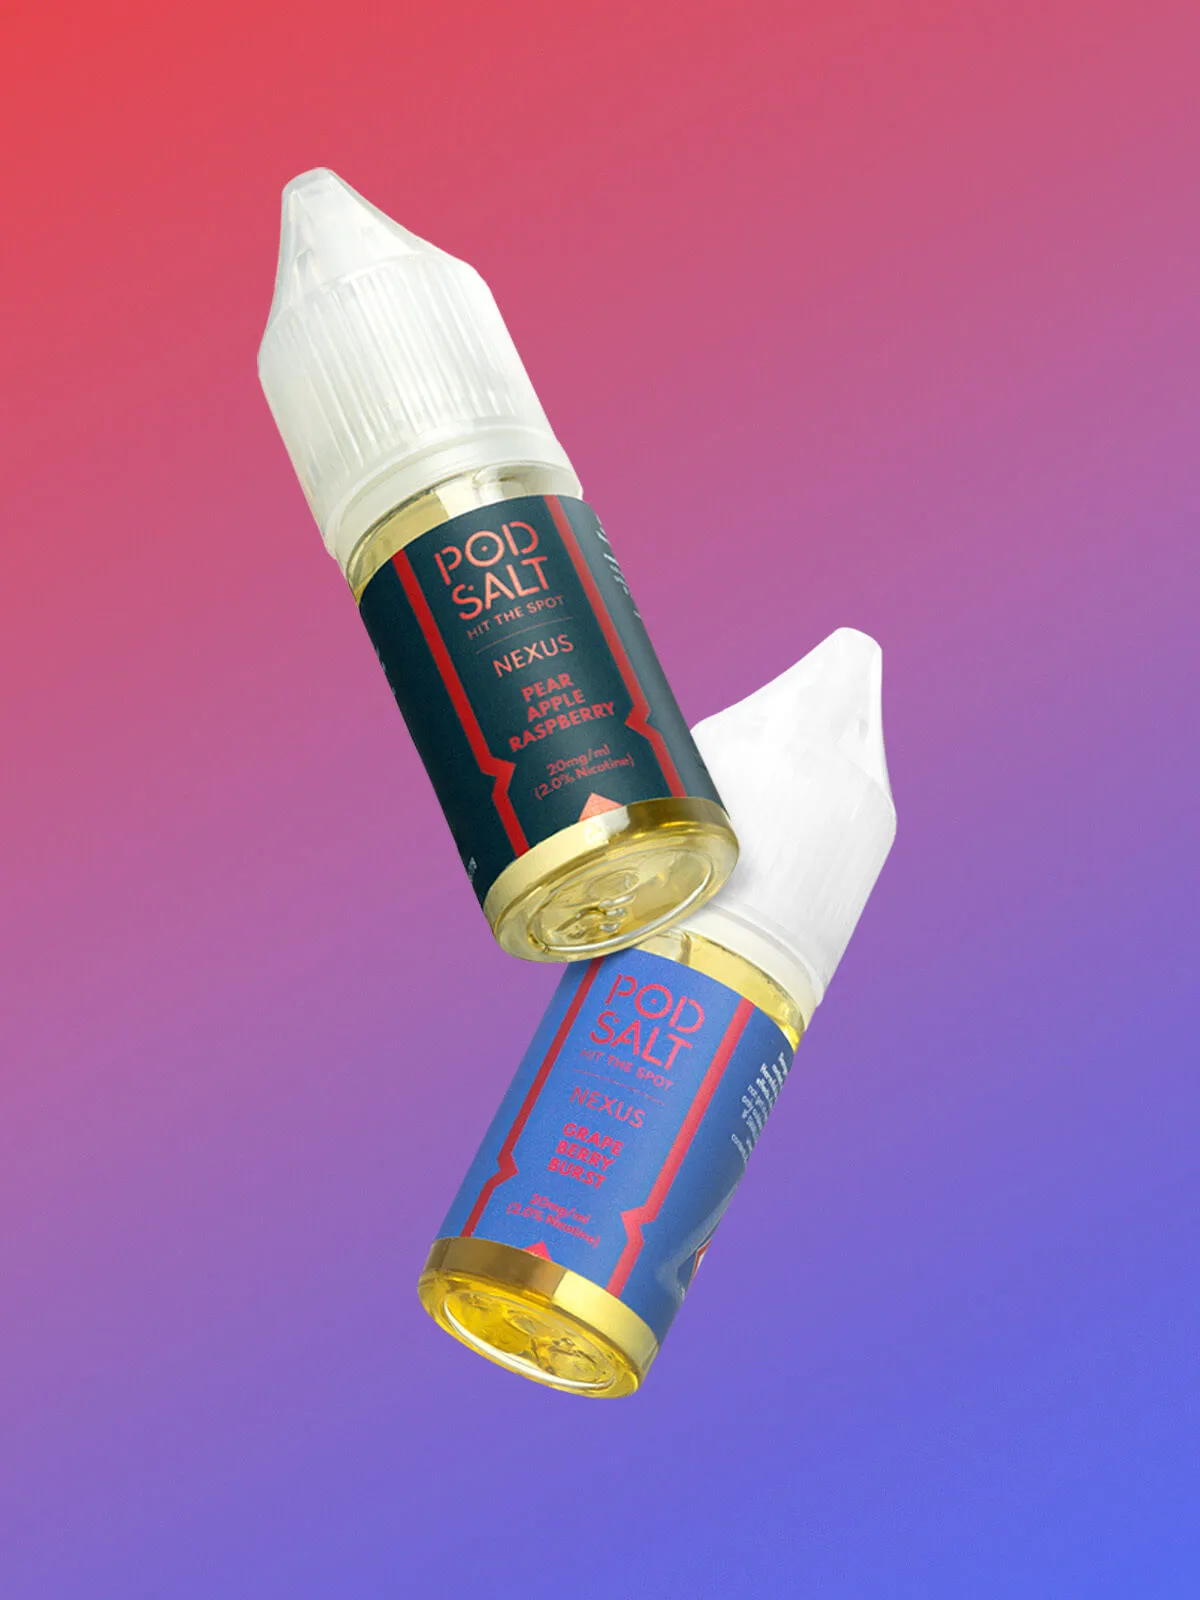 Two bottles of Pod Salt Nexus e-liquid in front of a pink and purple background